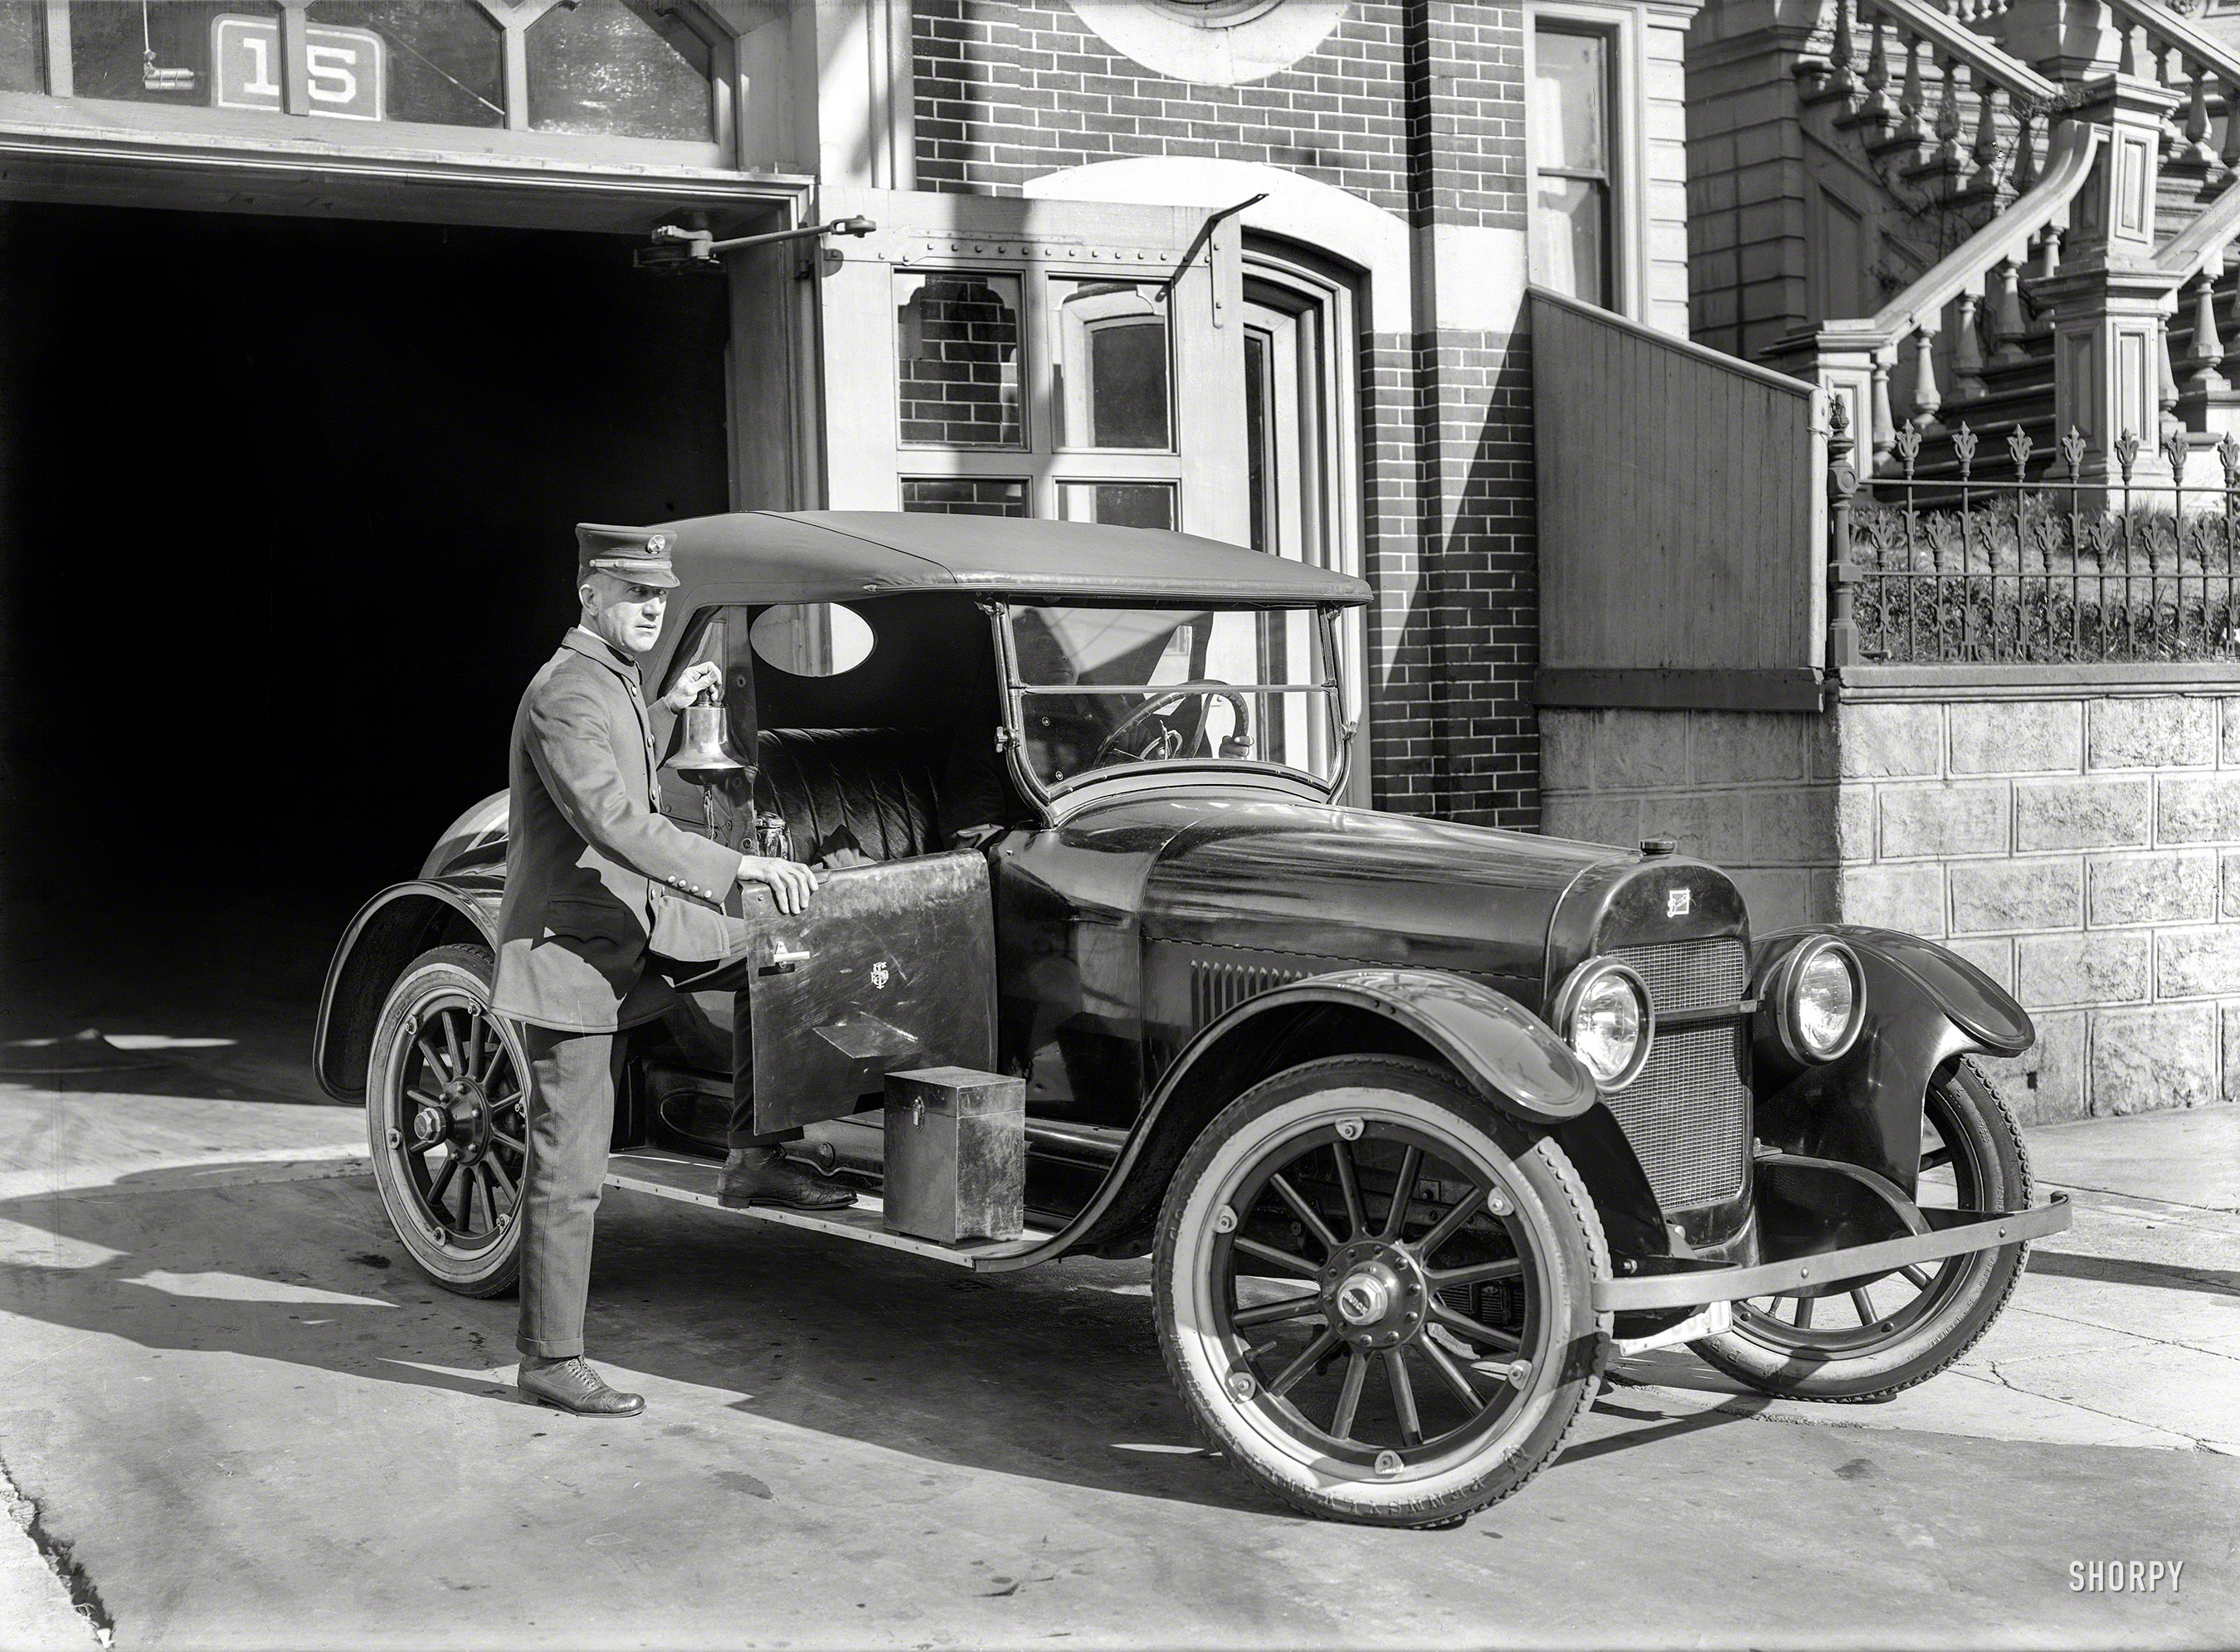 San Francisco, 1922. "Buick roadster at California Street firehouse." If we ride along, can we ring the bell? 5x7 glassneg by Christopher Helin. View full size.